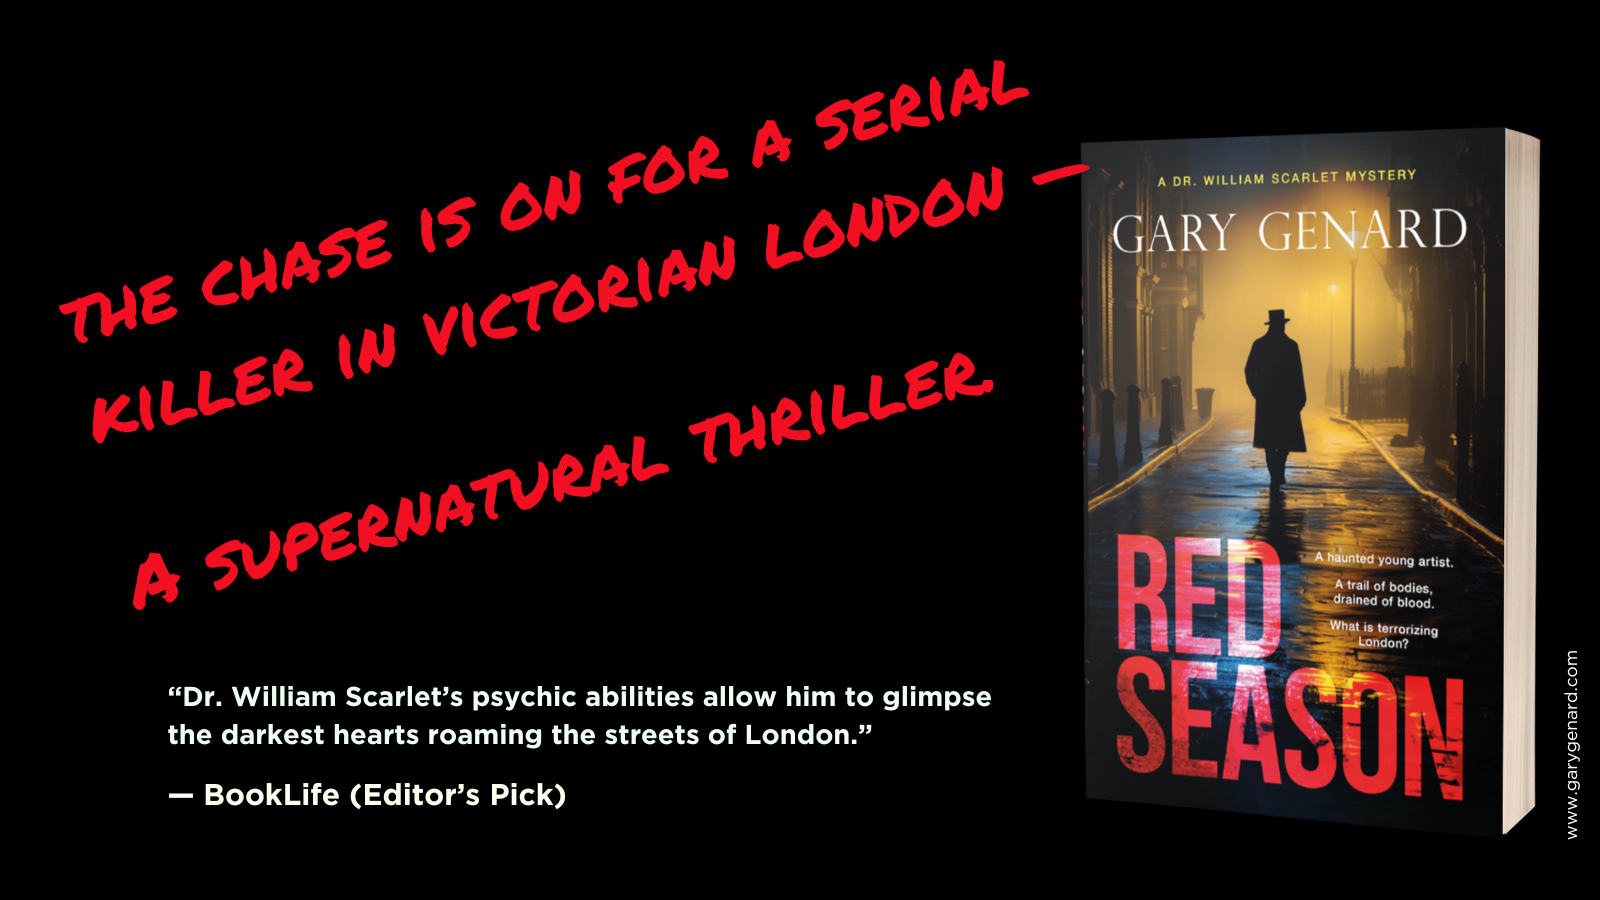 Red Season, Book #1 in the Dr. William Scarlet Mysteries, by Gary Genard.